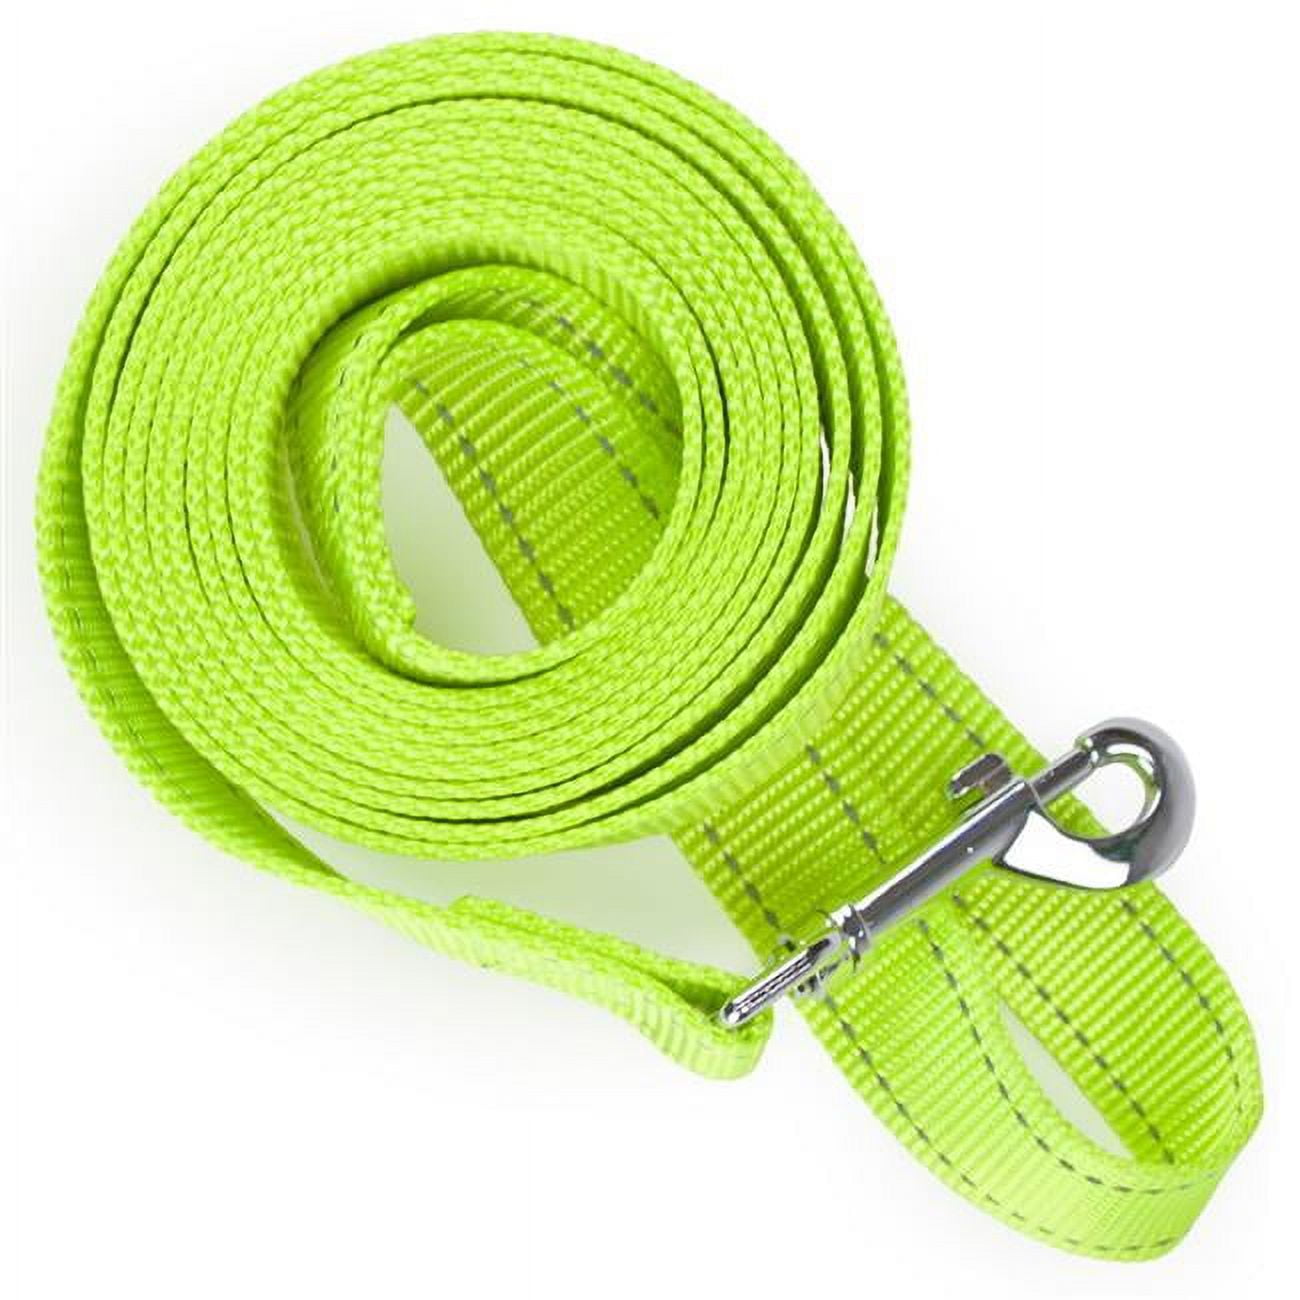 Picture of BrybellyHoldings ALSH-202 8-foot Reflective Nylon Safety Leash - Large